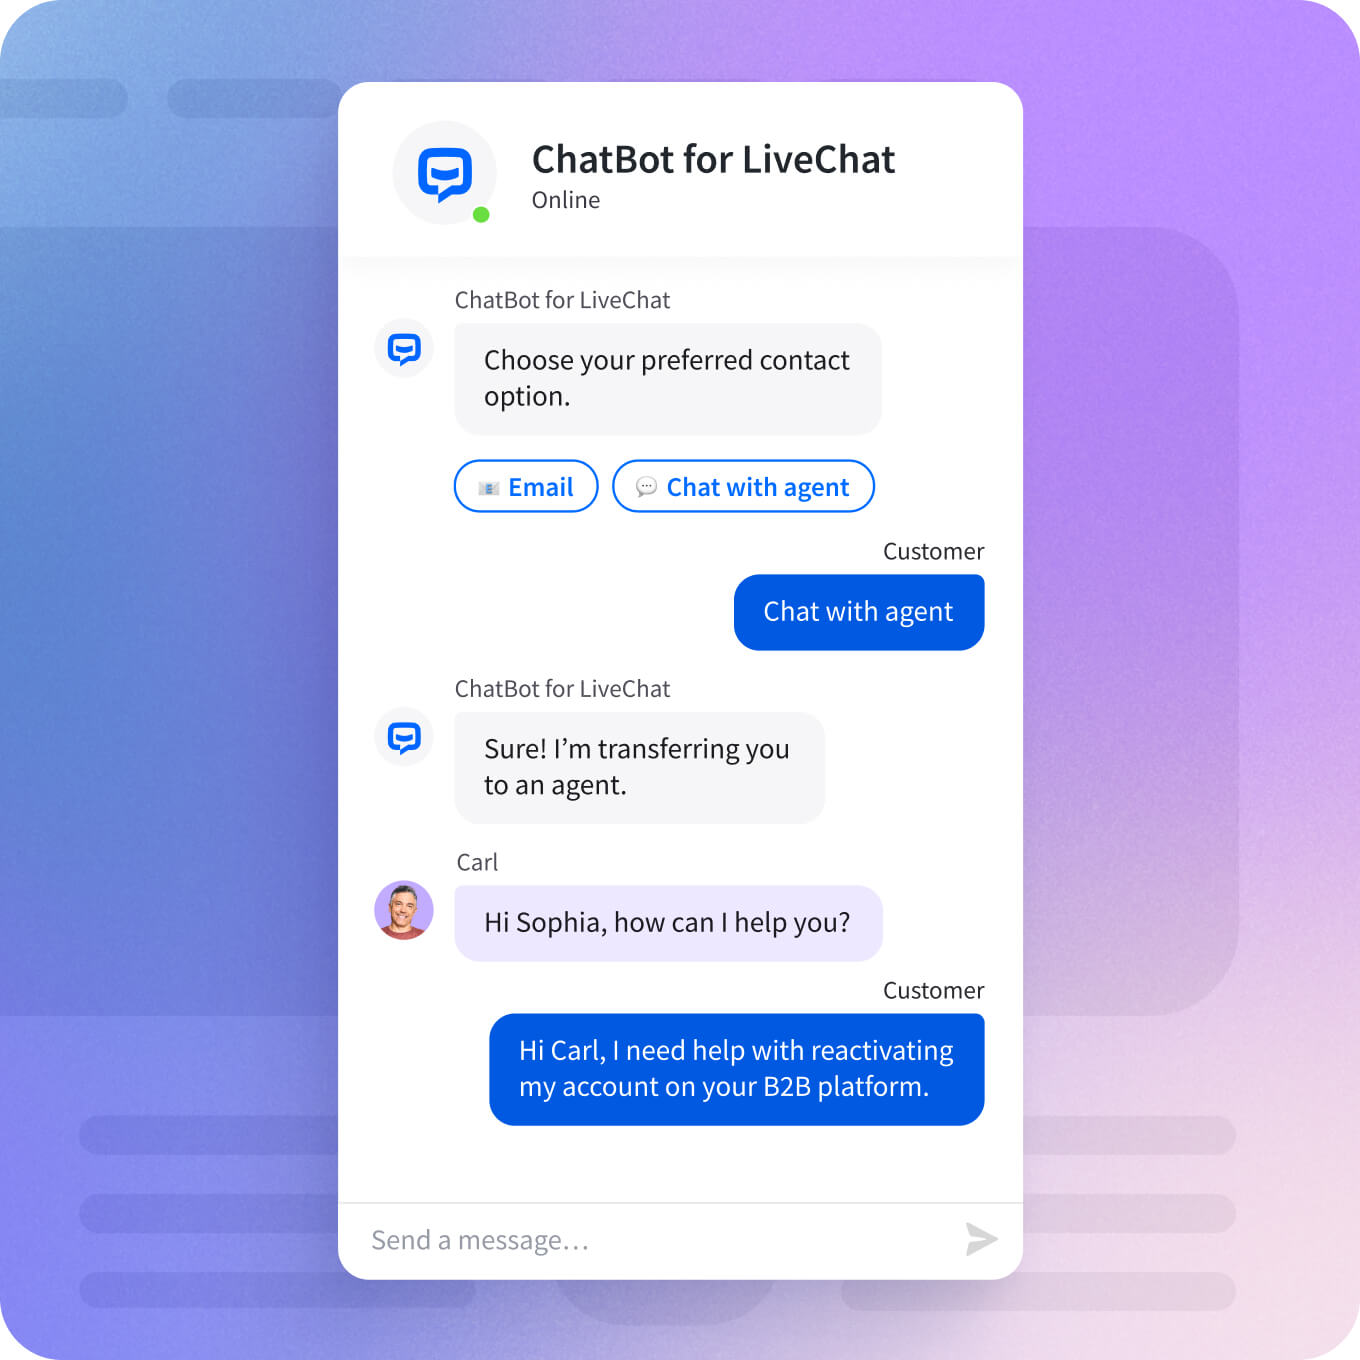 An AI chatbot named 'ChatBot for LiveChat' offering the customer a choice between email and chatting with an agent, transferring to a live agent, who then assists the customer with reactivating their B2B platform account.